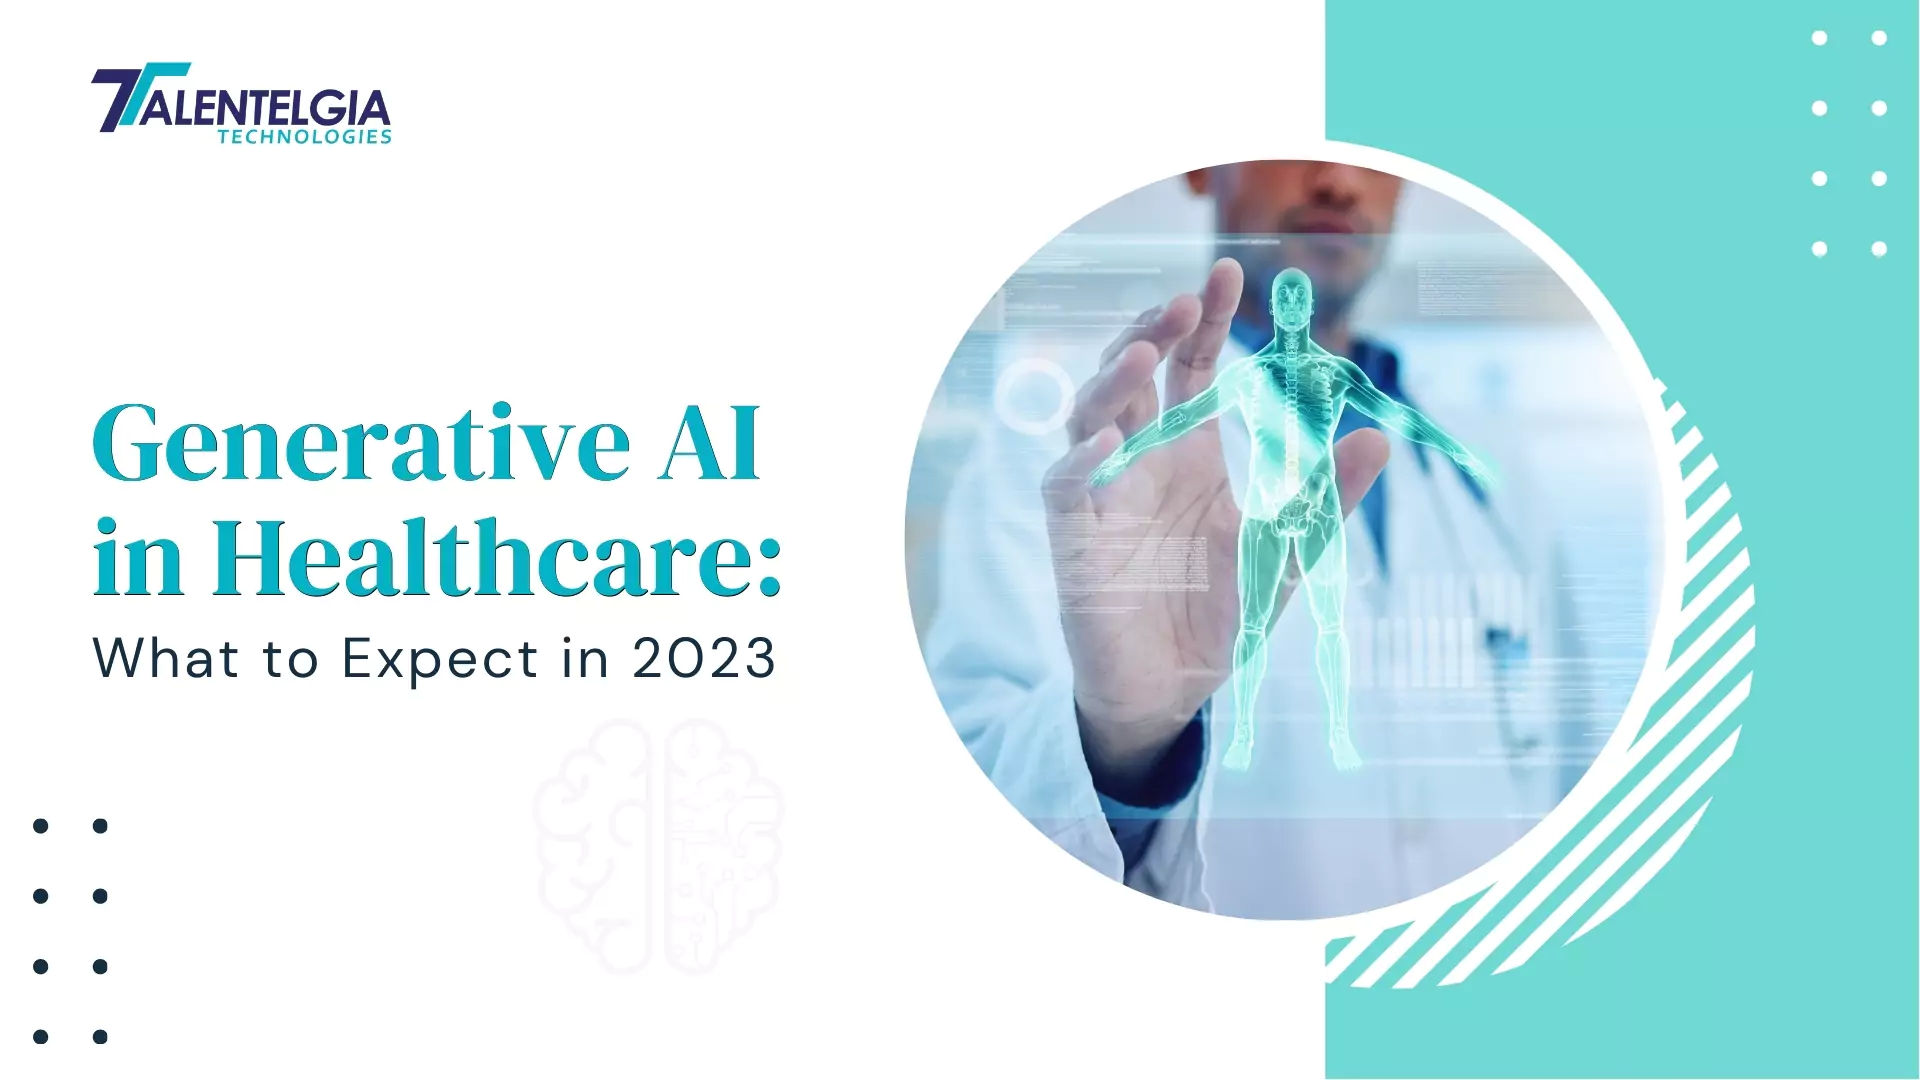 Generative AI in Healthcare: What to Expect in 2023